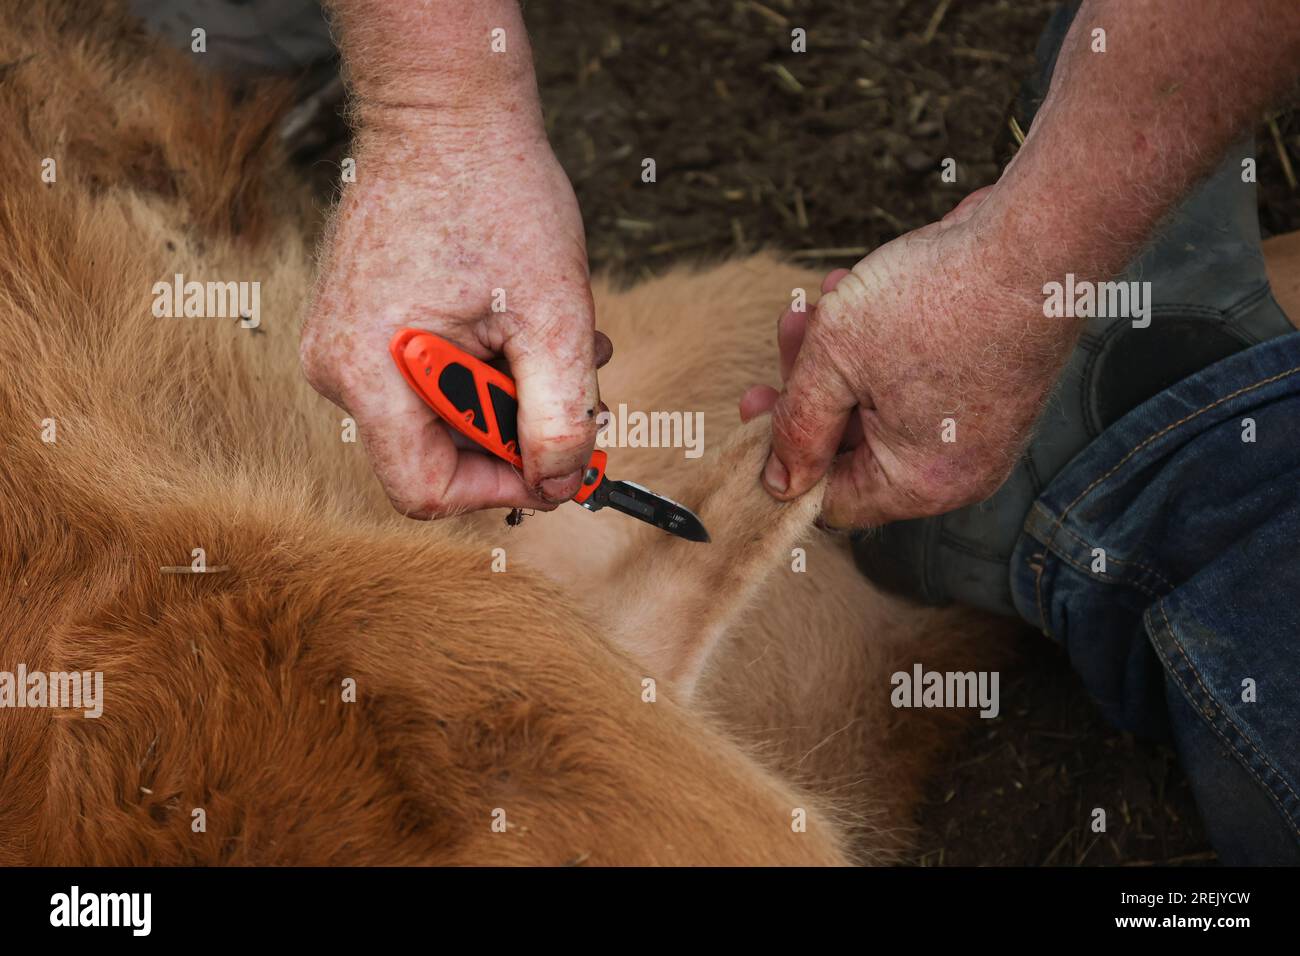 Cattle castration knife close up Stock Photo